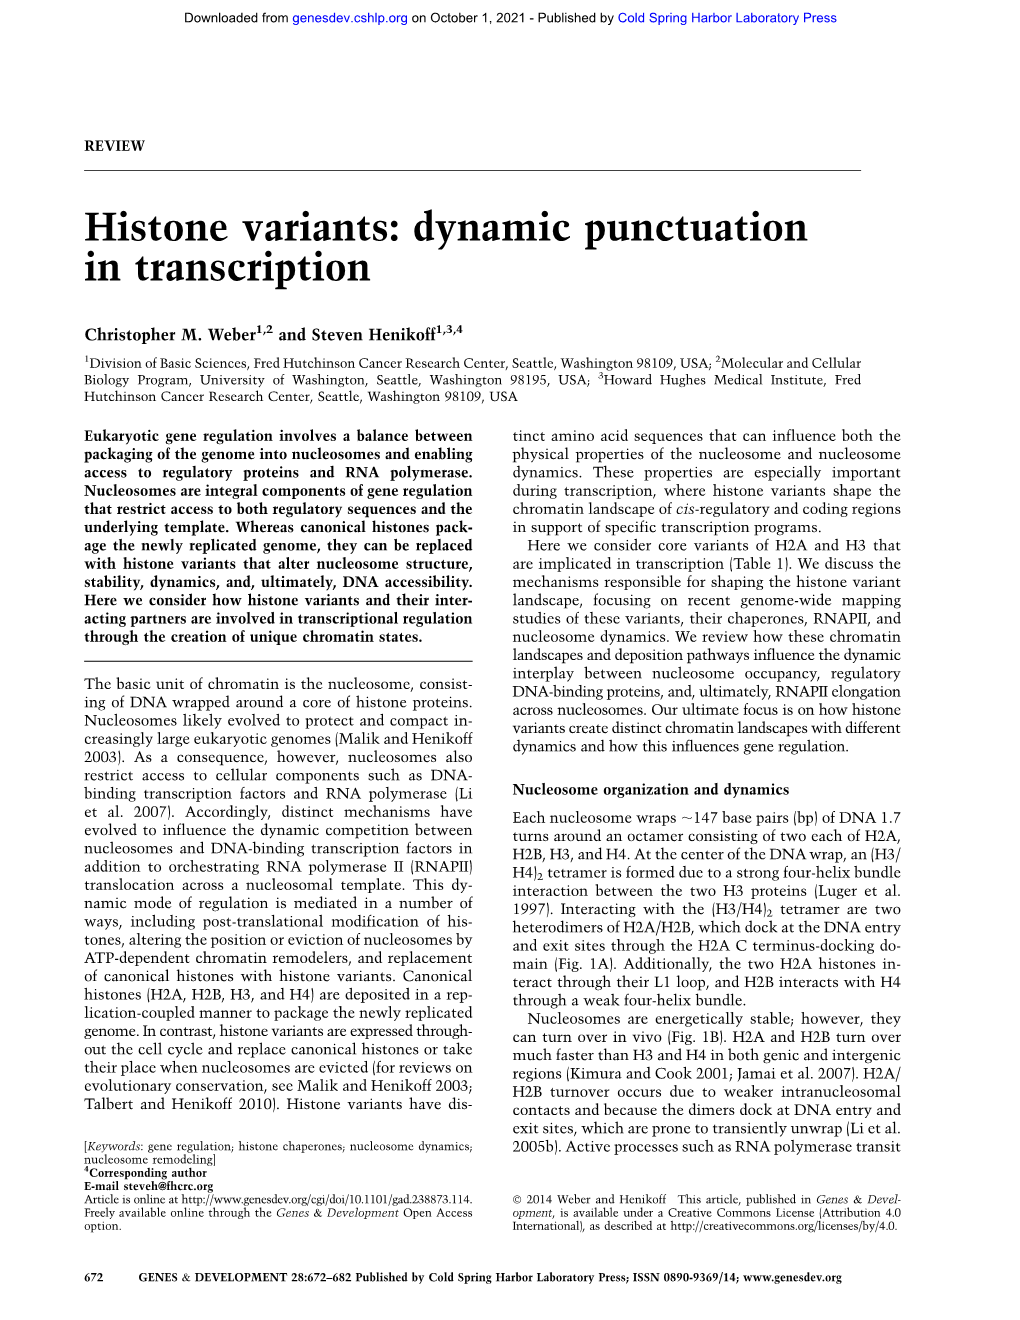 Histone Variants: Dynamic Punctuation in Transcription